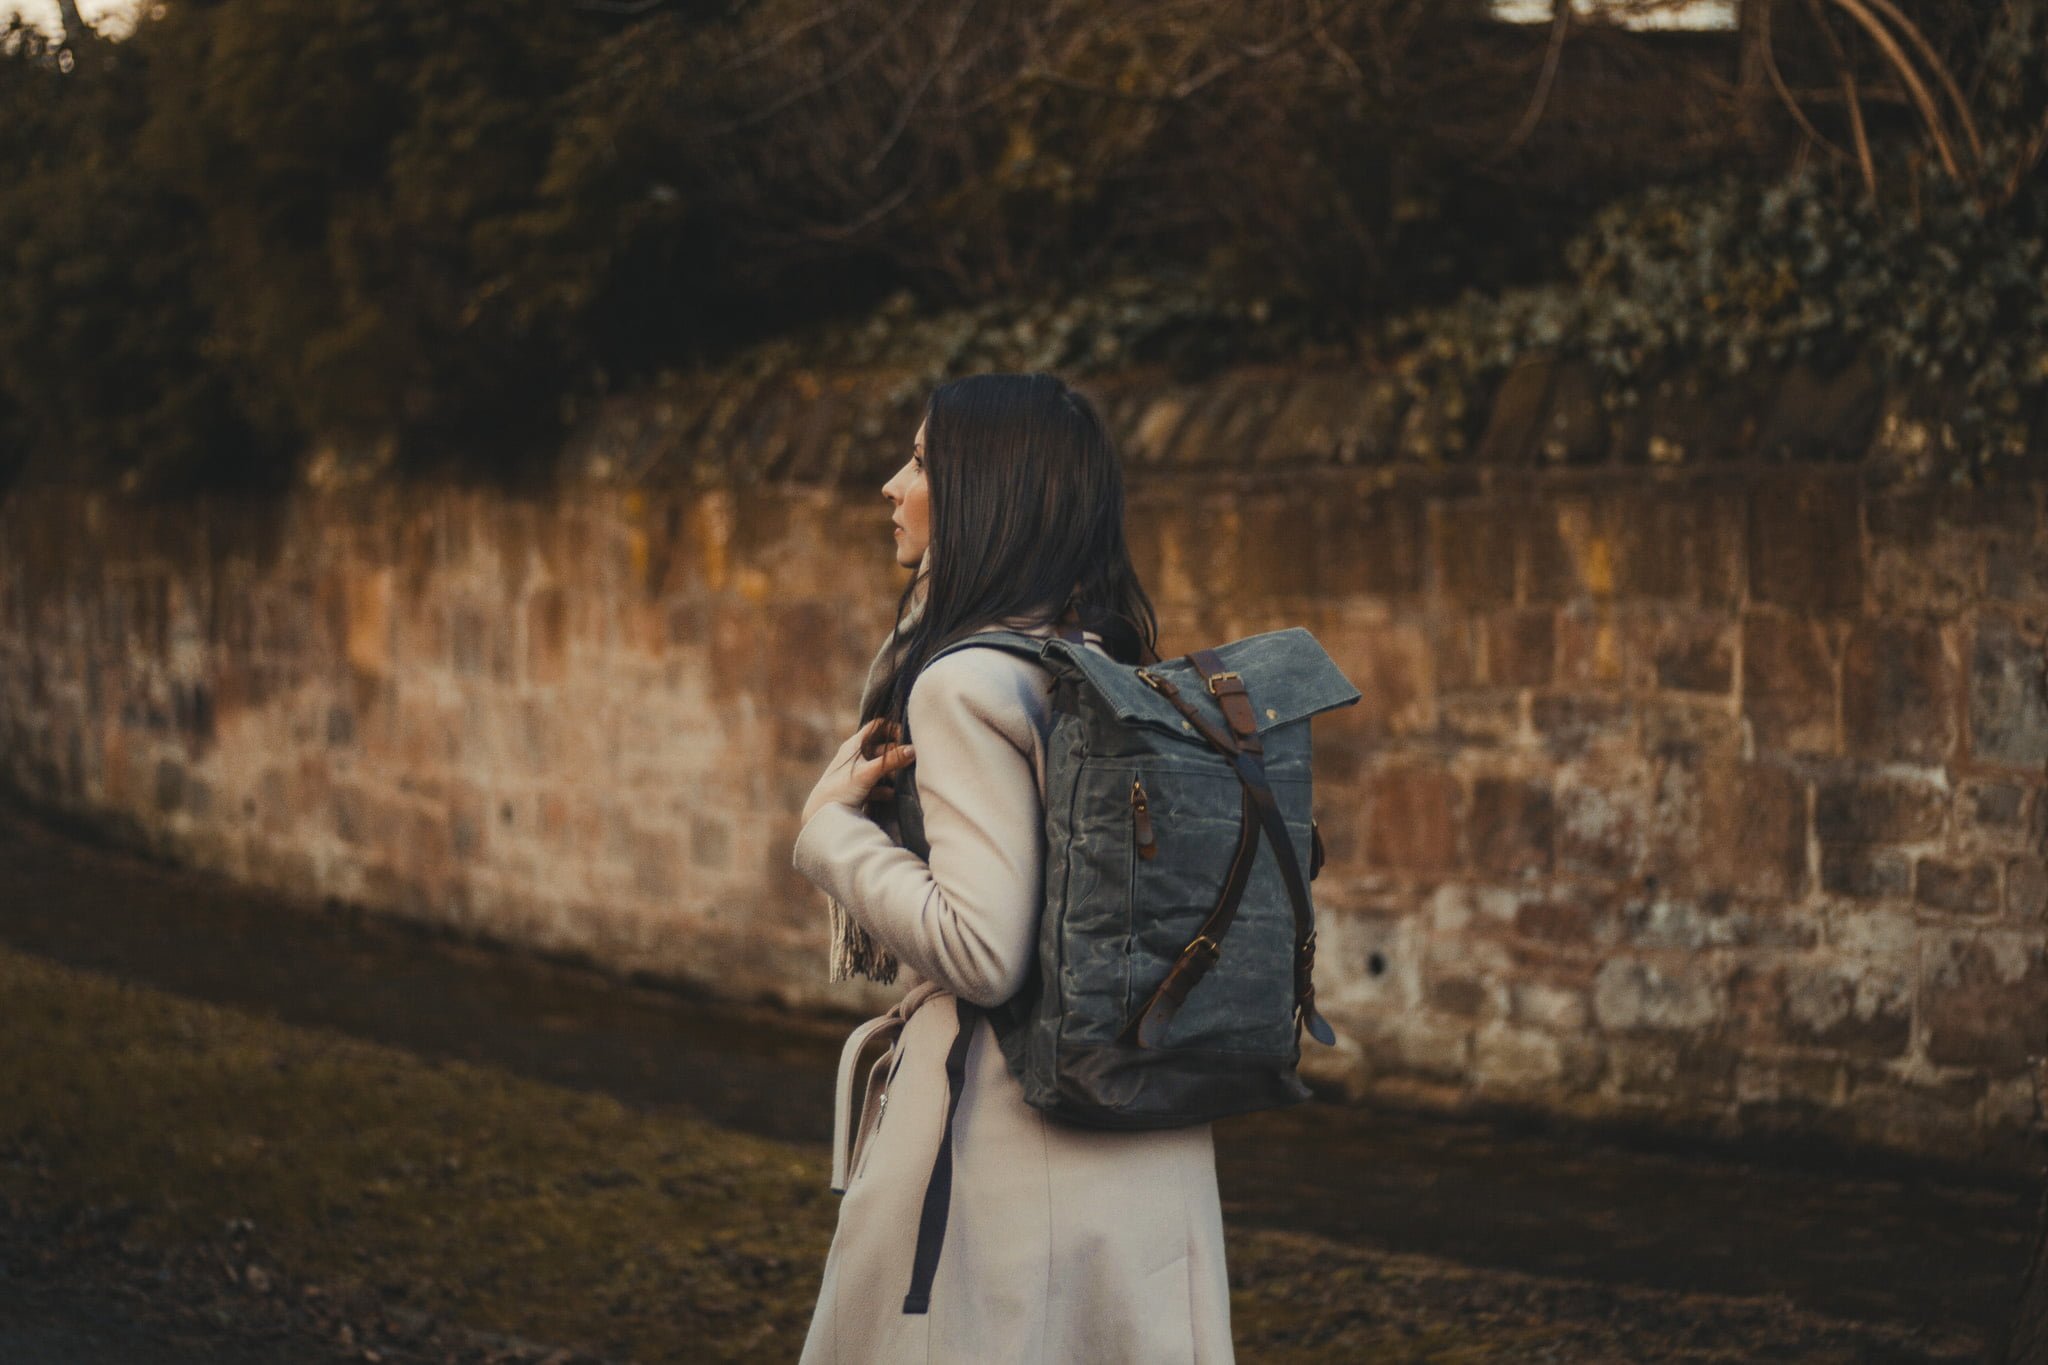 Waxed Cotton Canvas and Leather Backpack Rucksack - Women'sLadies Girls Backpack - Gemma InkSmudge Journals, Liverpool - The Harlington Backpack in Slate by Oldfield